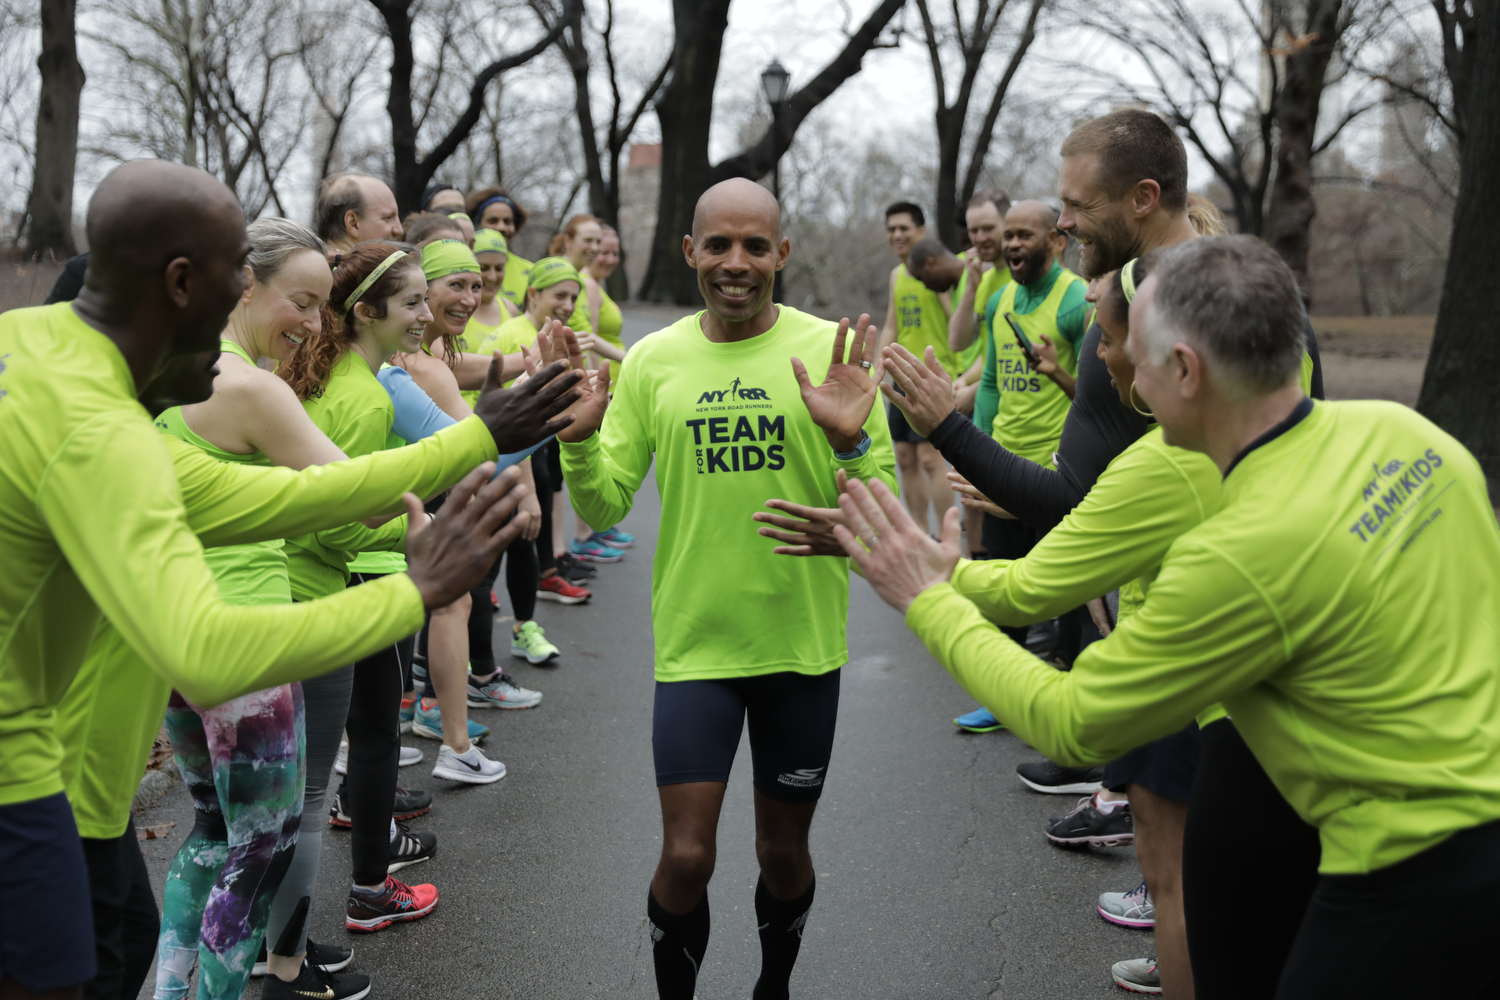 Marathon Legend Meb Keflezighi to Partner with New York Road Runners